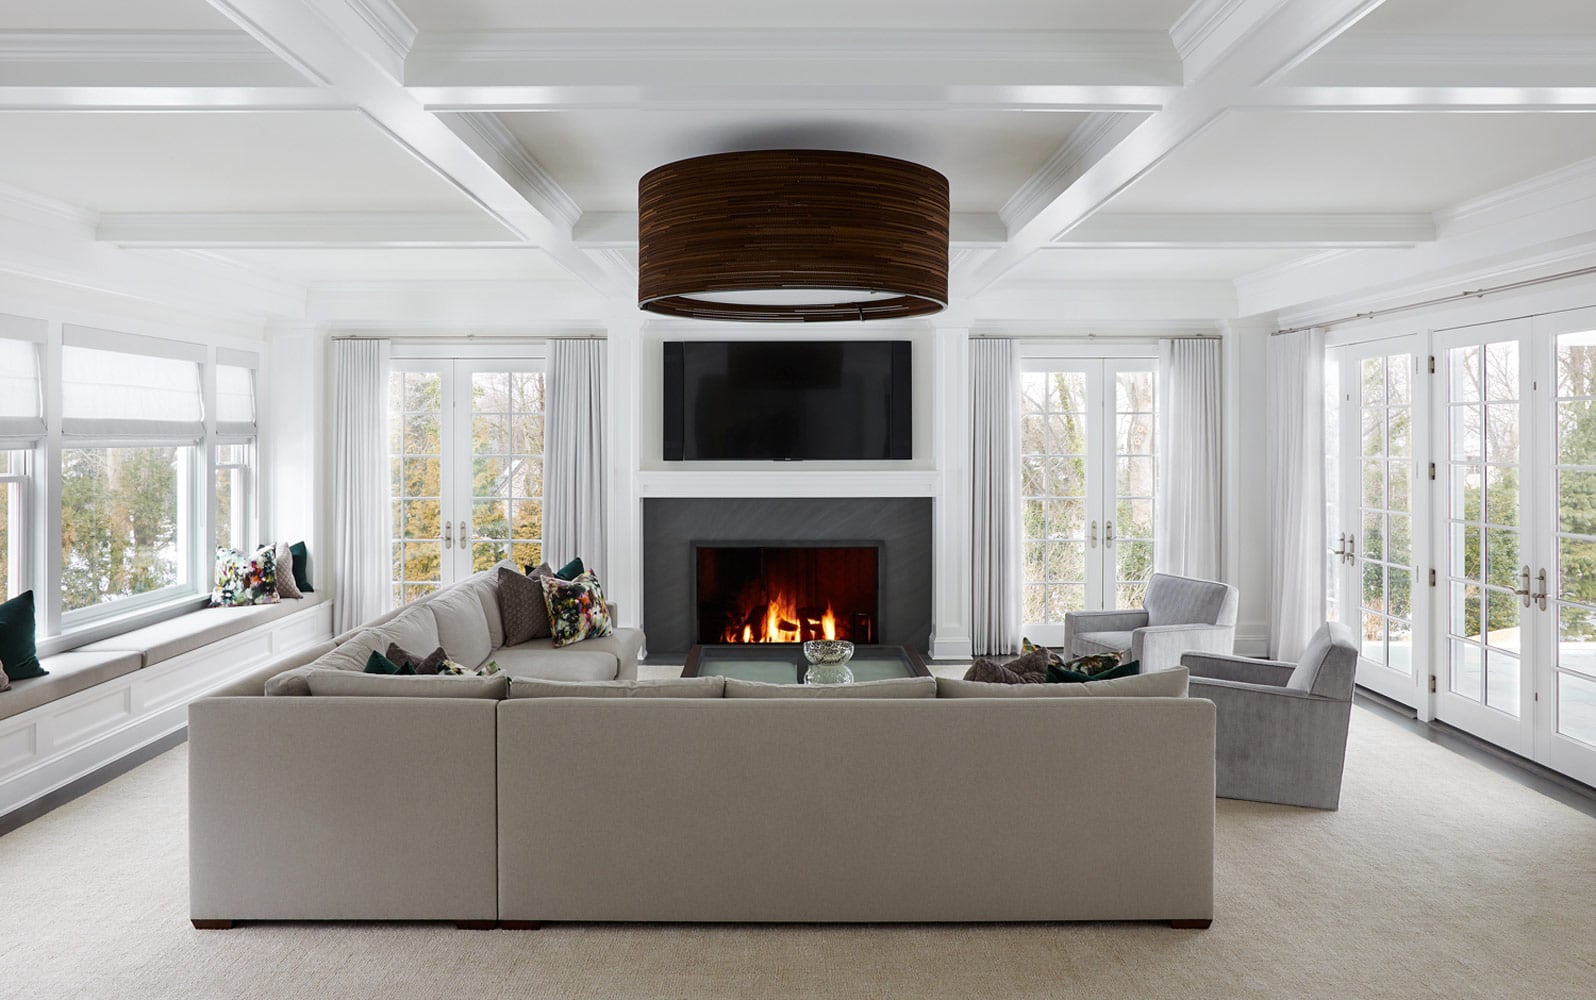 Family room on Long Island designed by Annette Jaffe Interiors